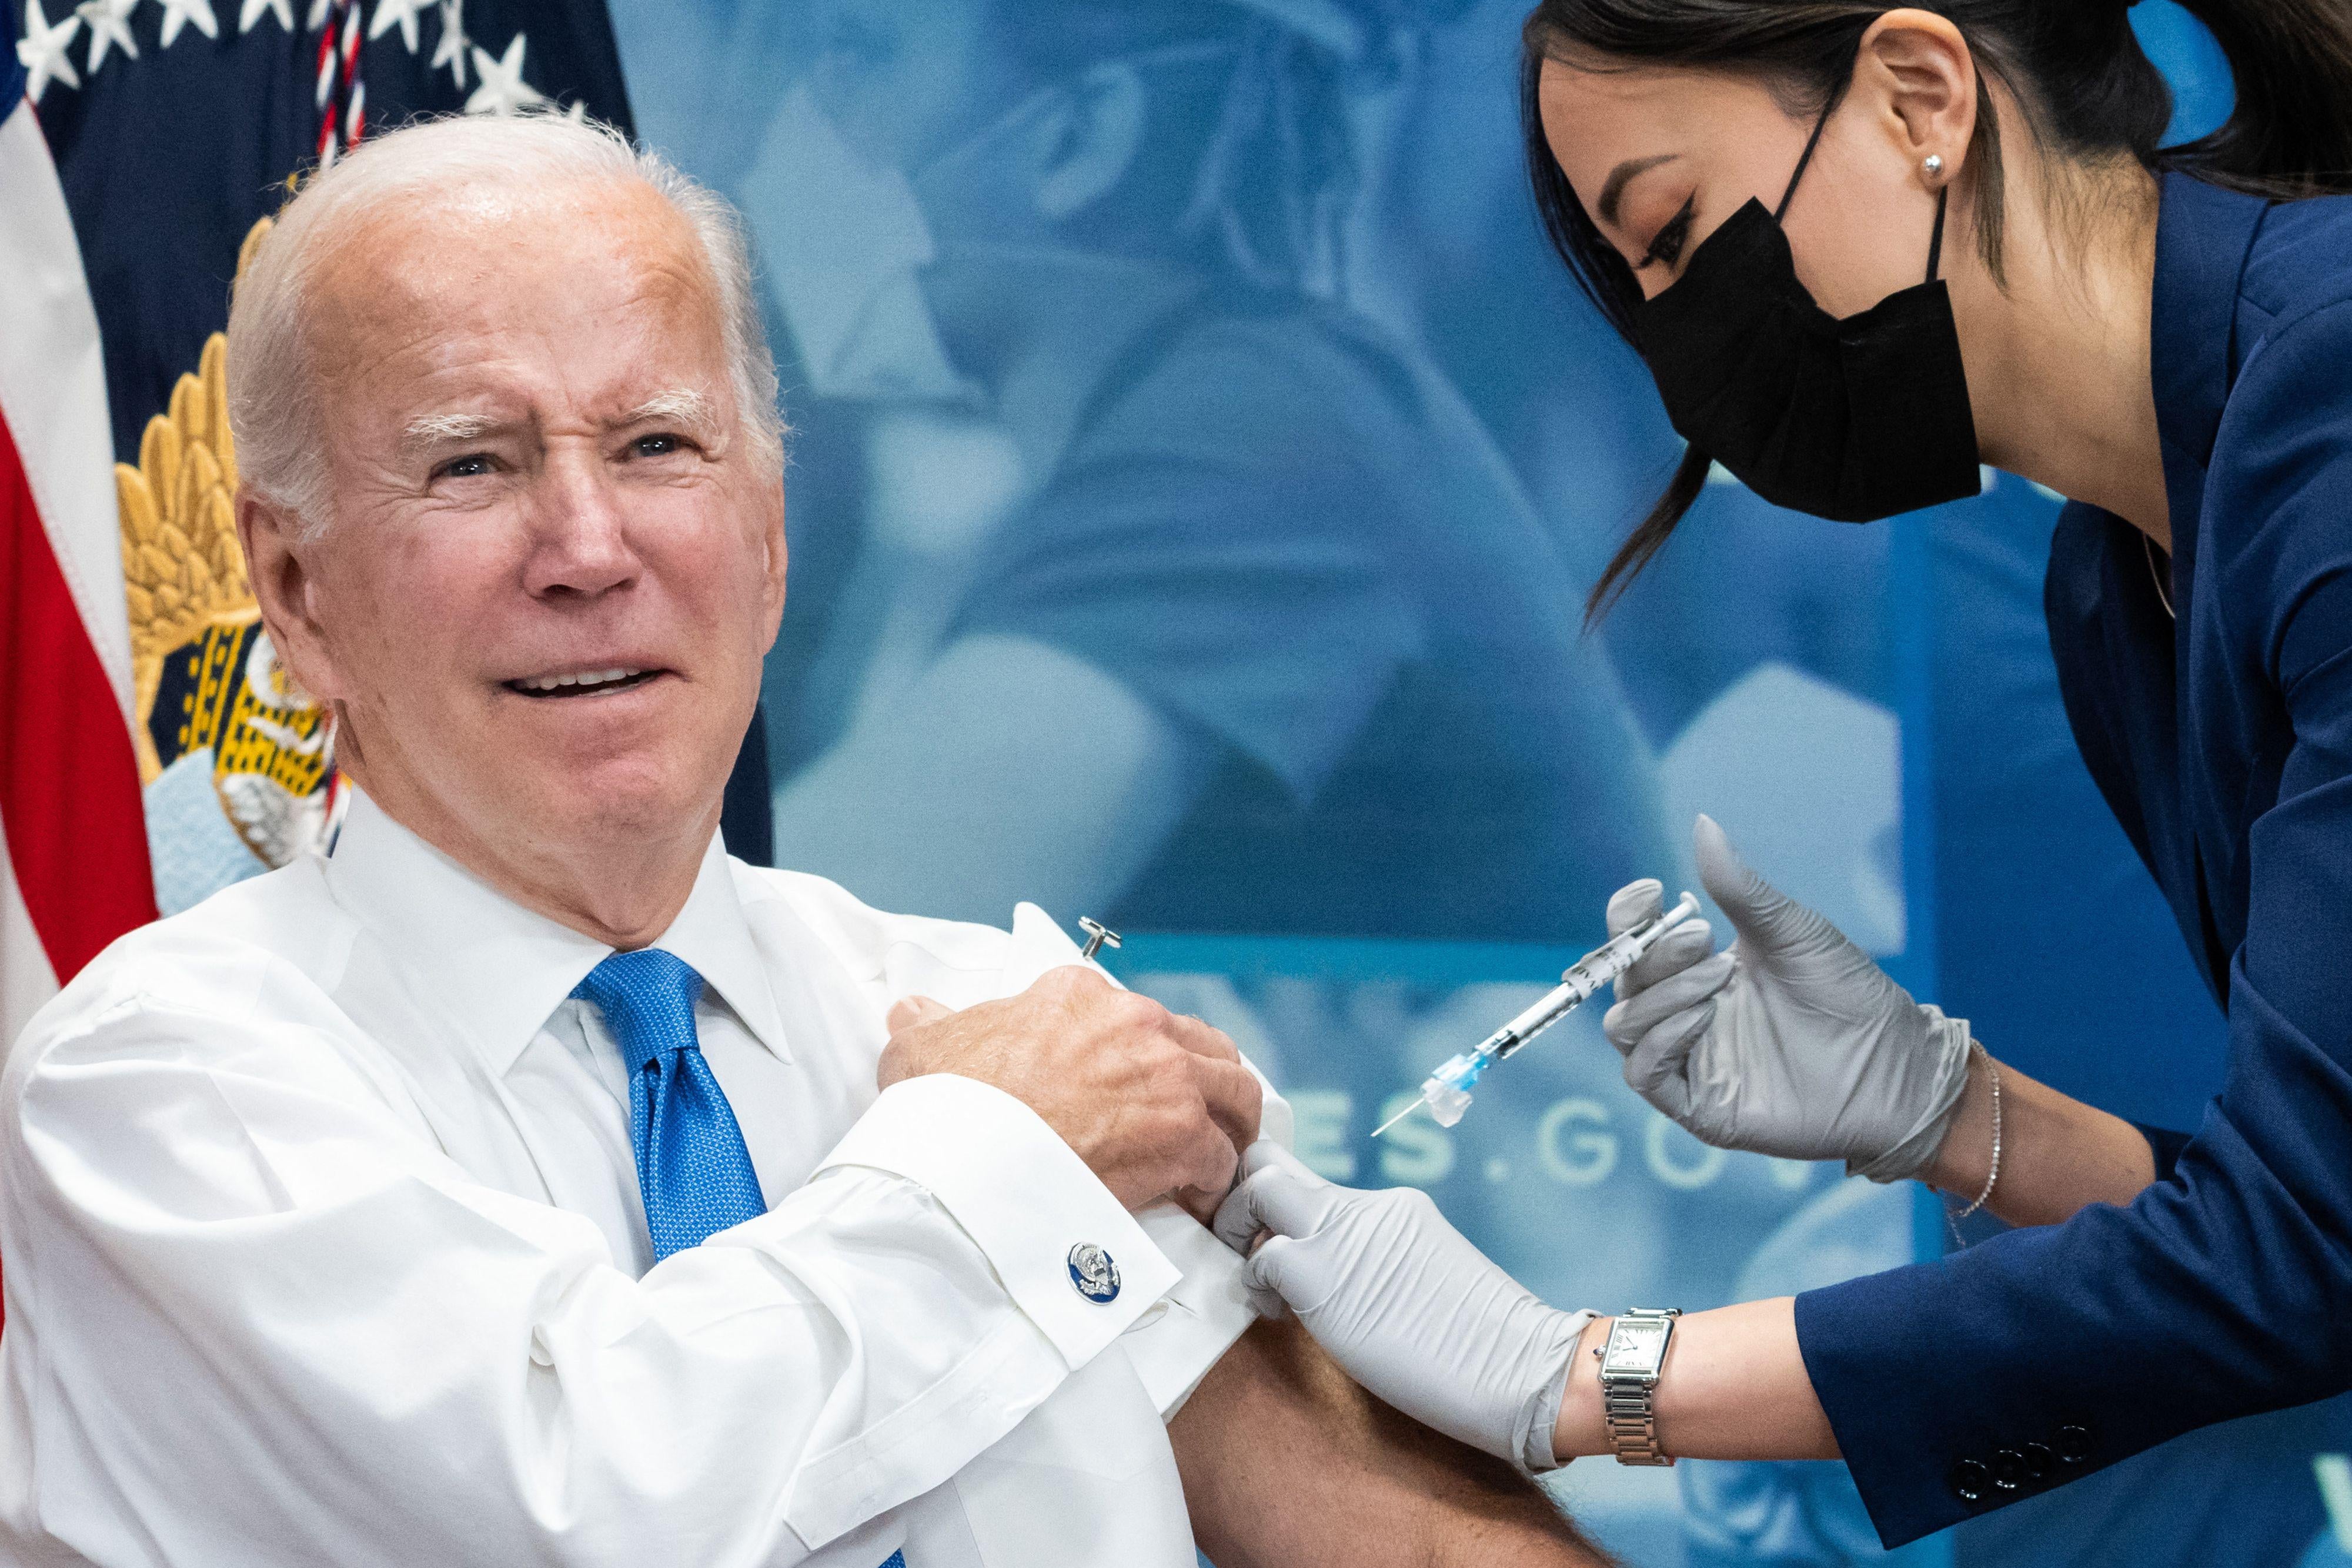 The Most Lawless Court in the Country Won’t Let Biden Vaccinate His Own Workforce Dahlia Lithwick and Mark Joseph Stern